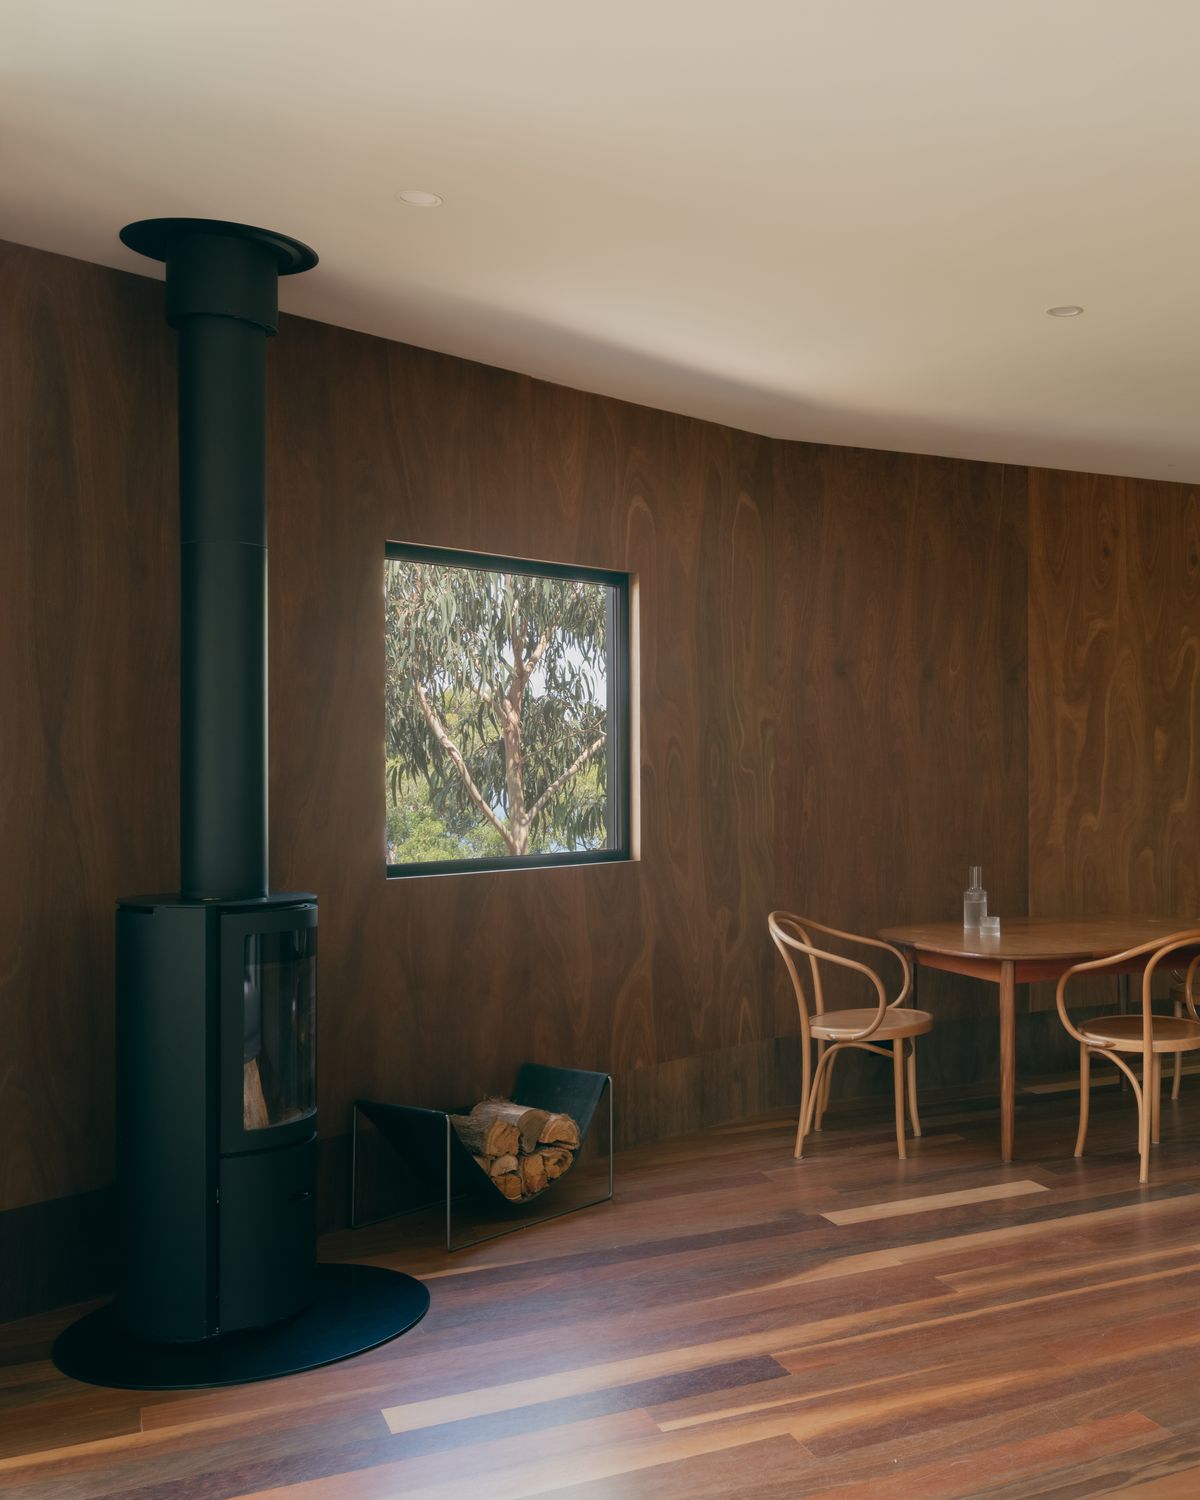 Kennett River House by MGAO showing timber interior with feature fireplace and window